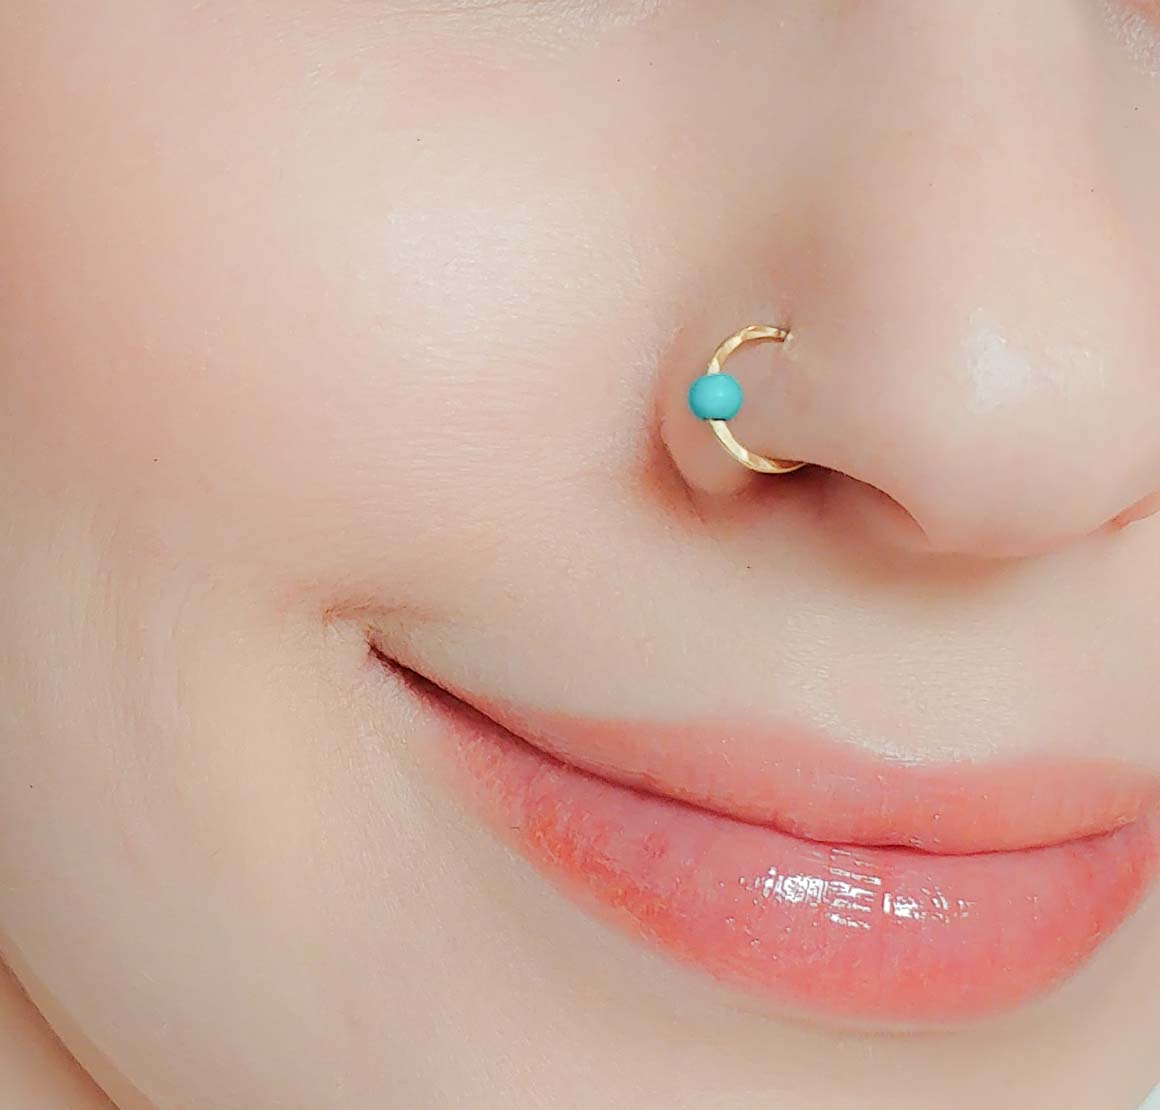 Blue Turquoise Nose Stud Turquoise Nose Piercing